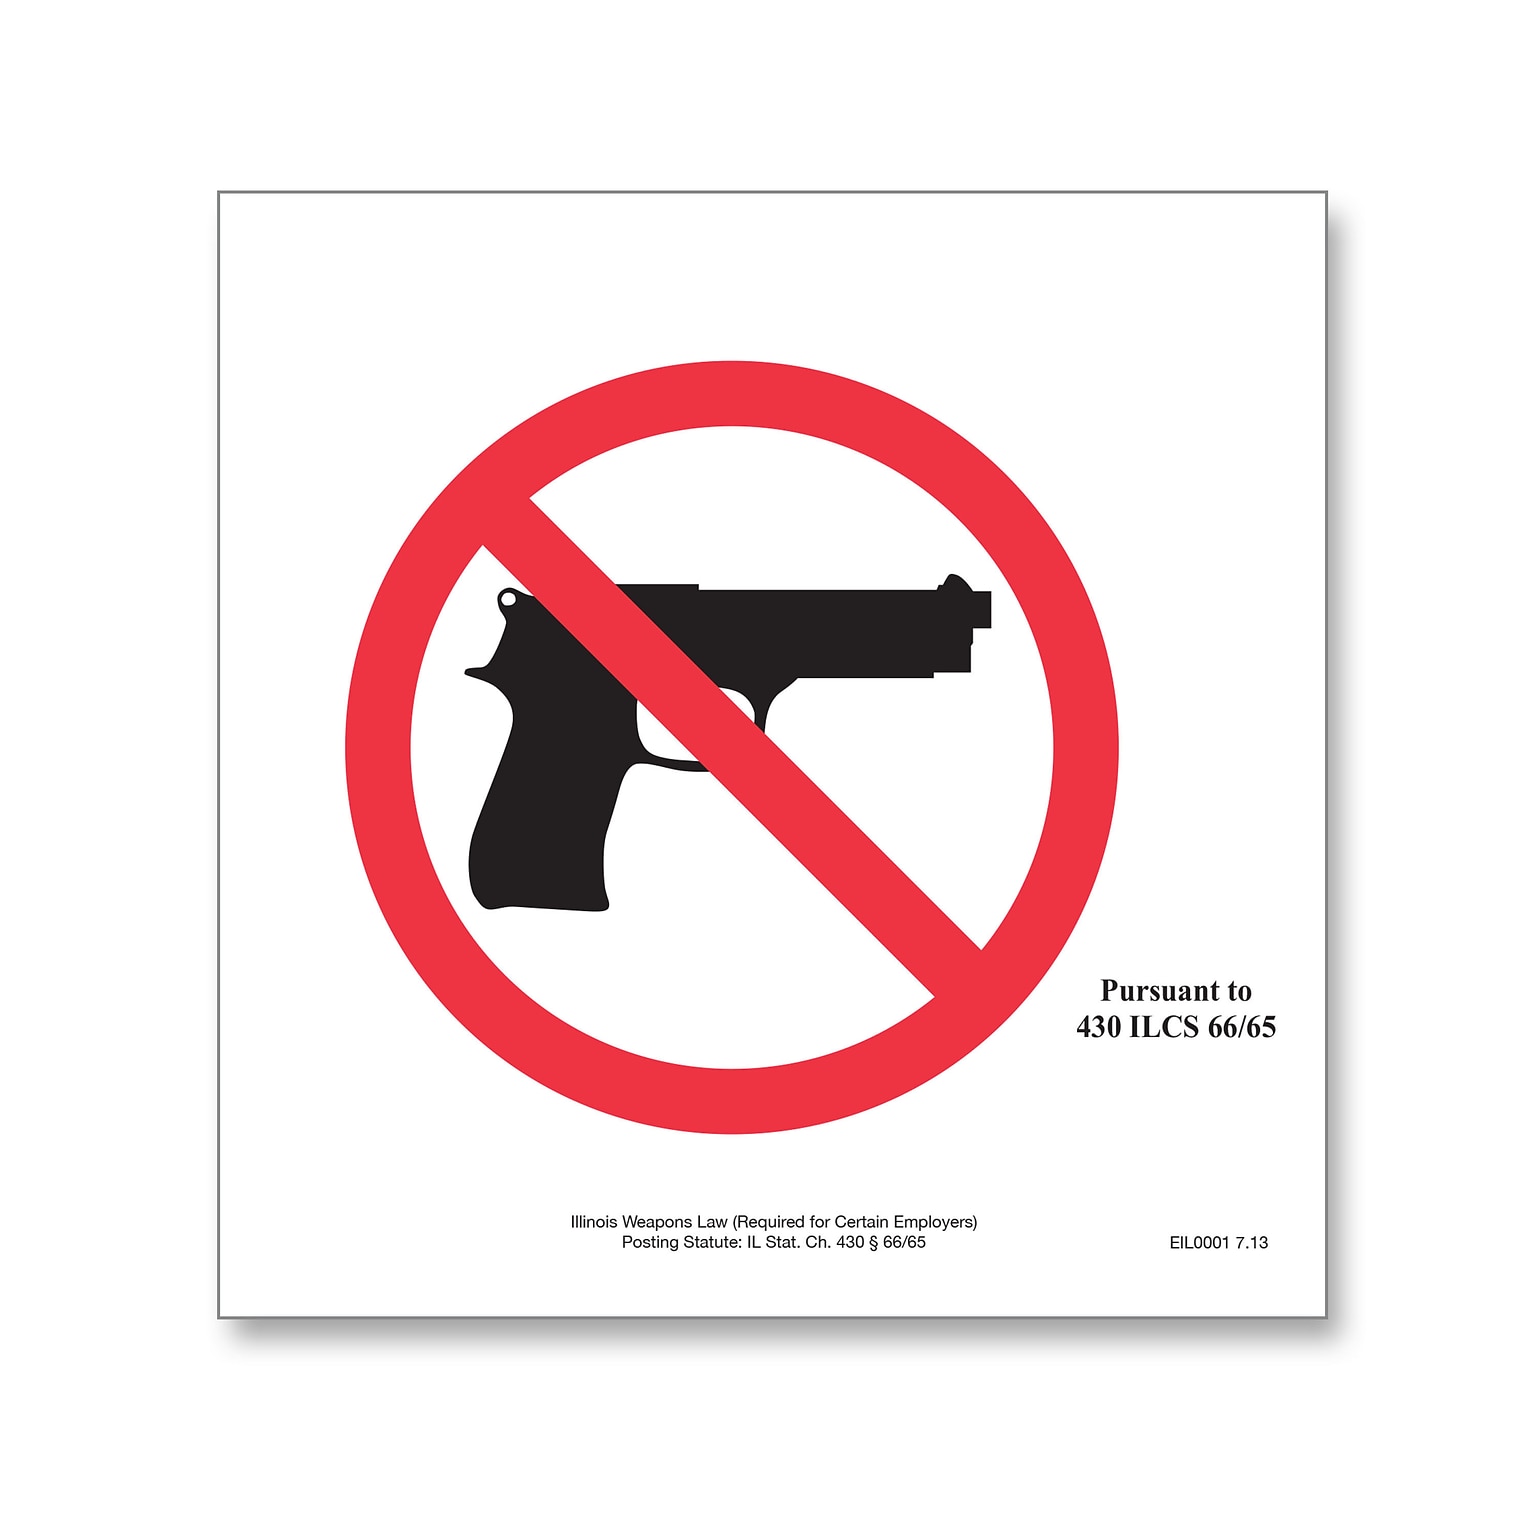 ComplyRight™ Weapons Law Poster Service, Illinois (U1200CWPIL)